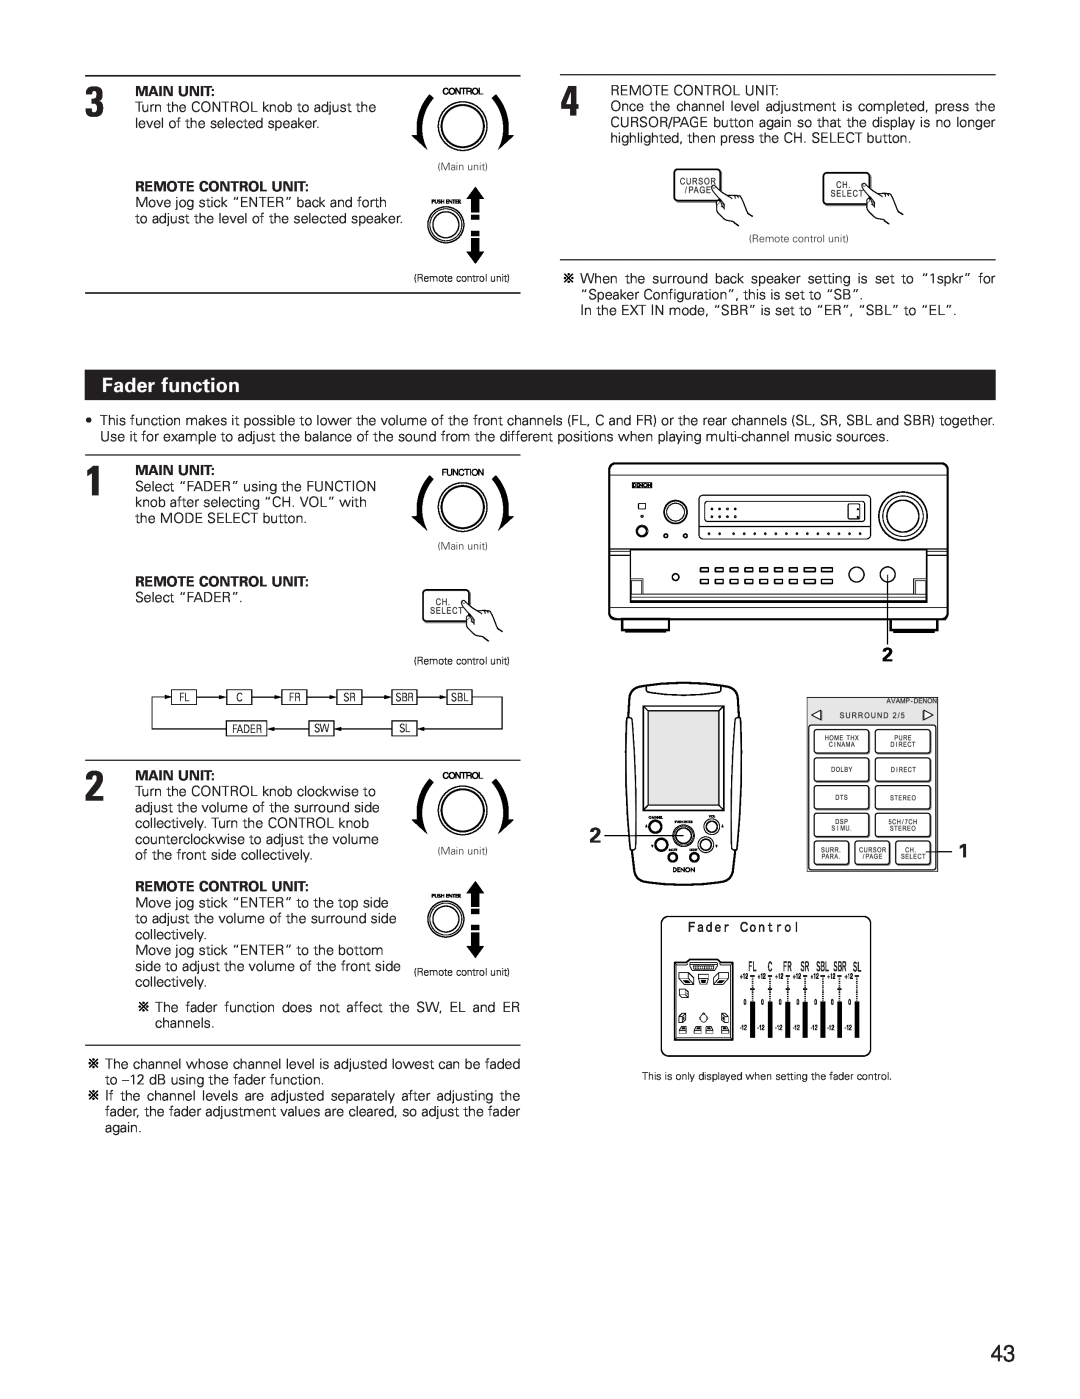 Denon AVR-5800 operating instructions Fader function, Main Unit, Remote Control Unit 